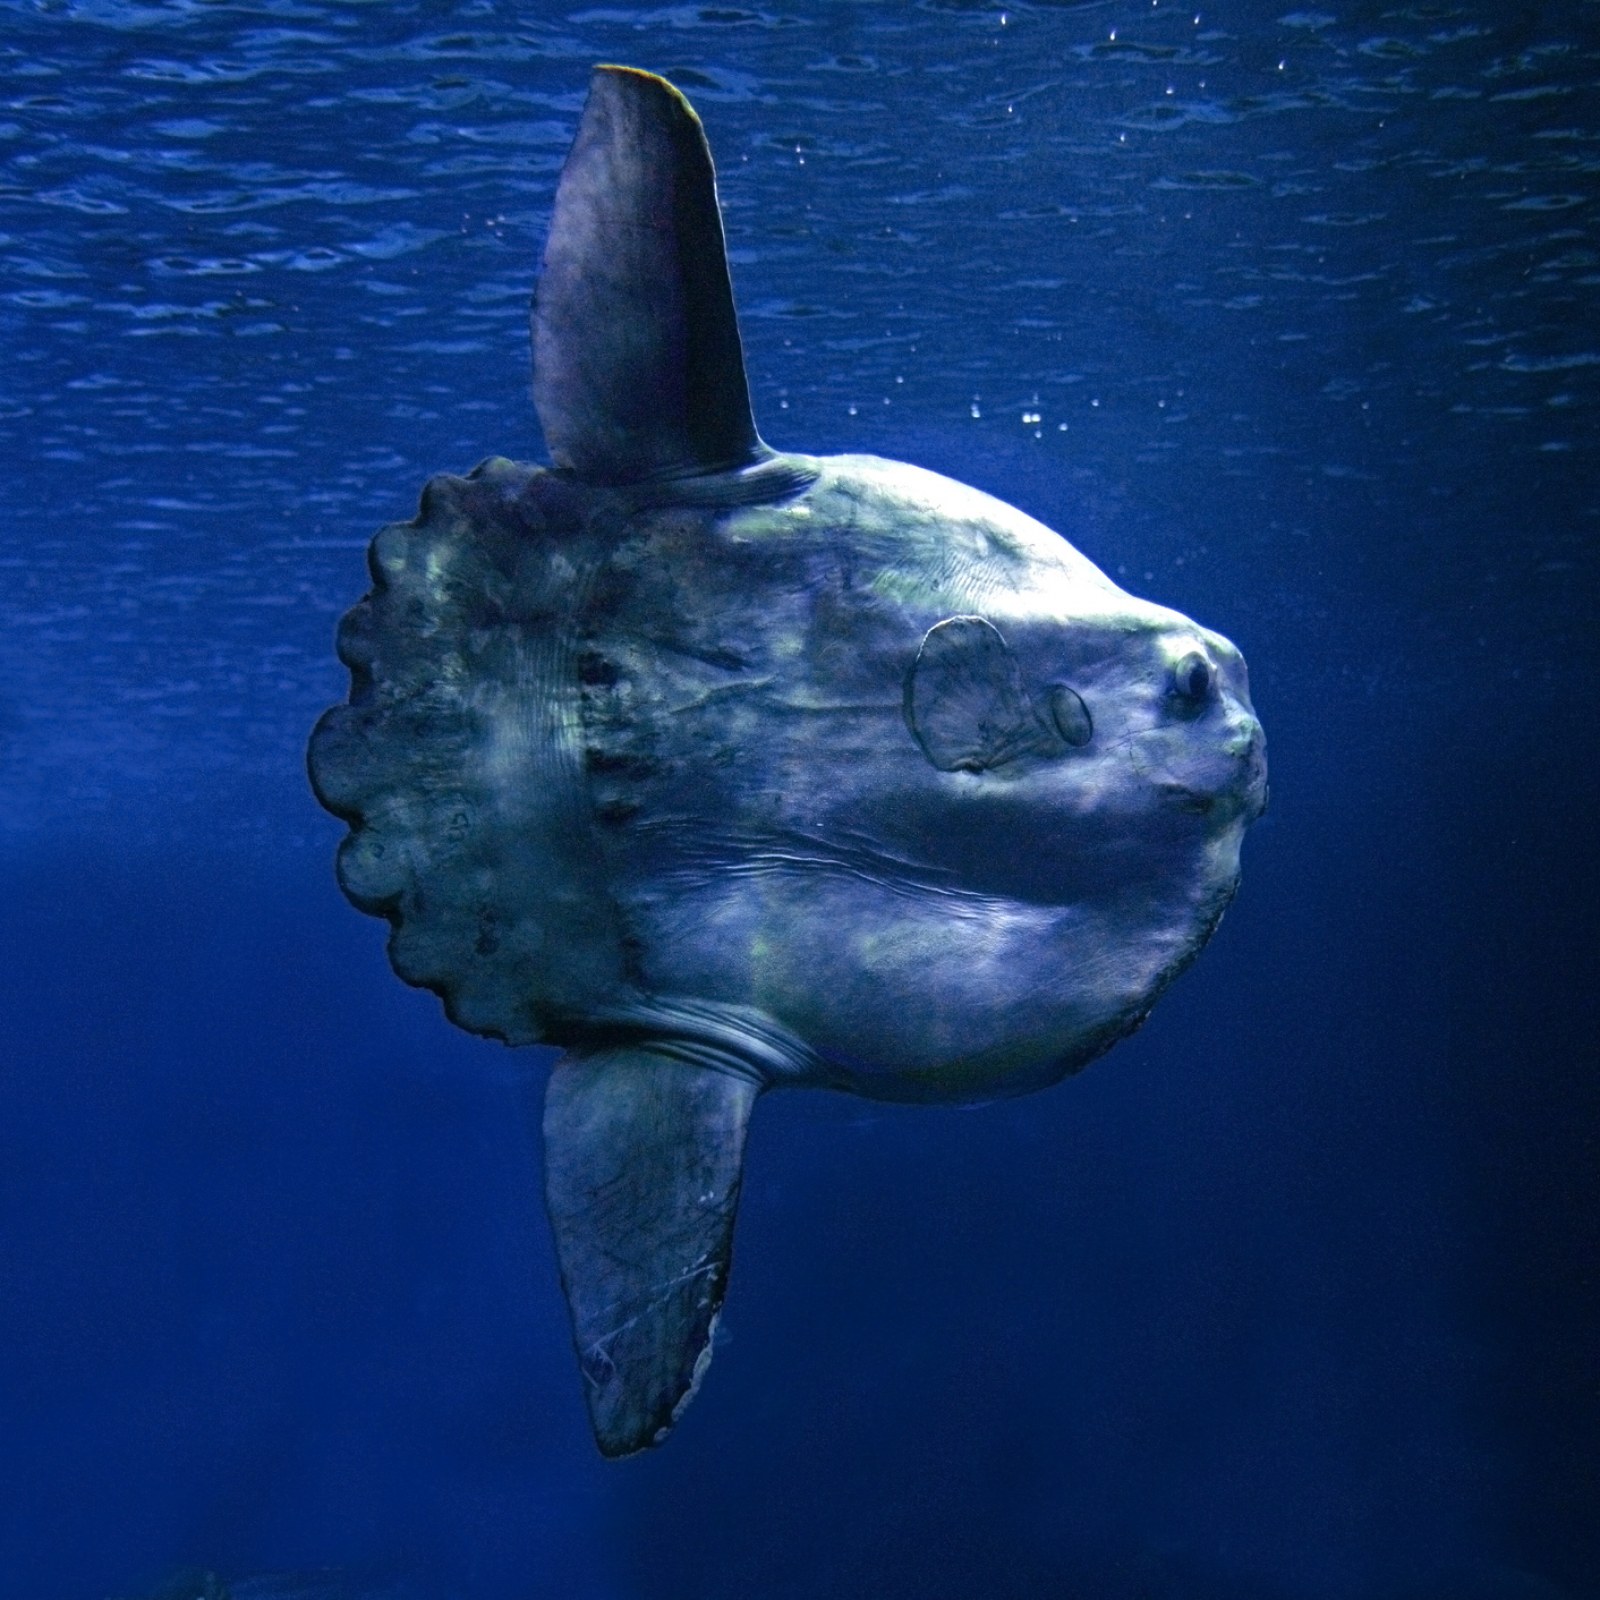 Man Kills Bizarre Ocean Sunfish by Dragging It Out of Water and